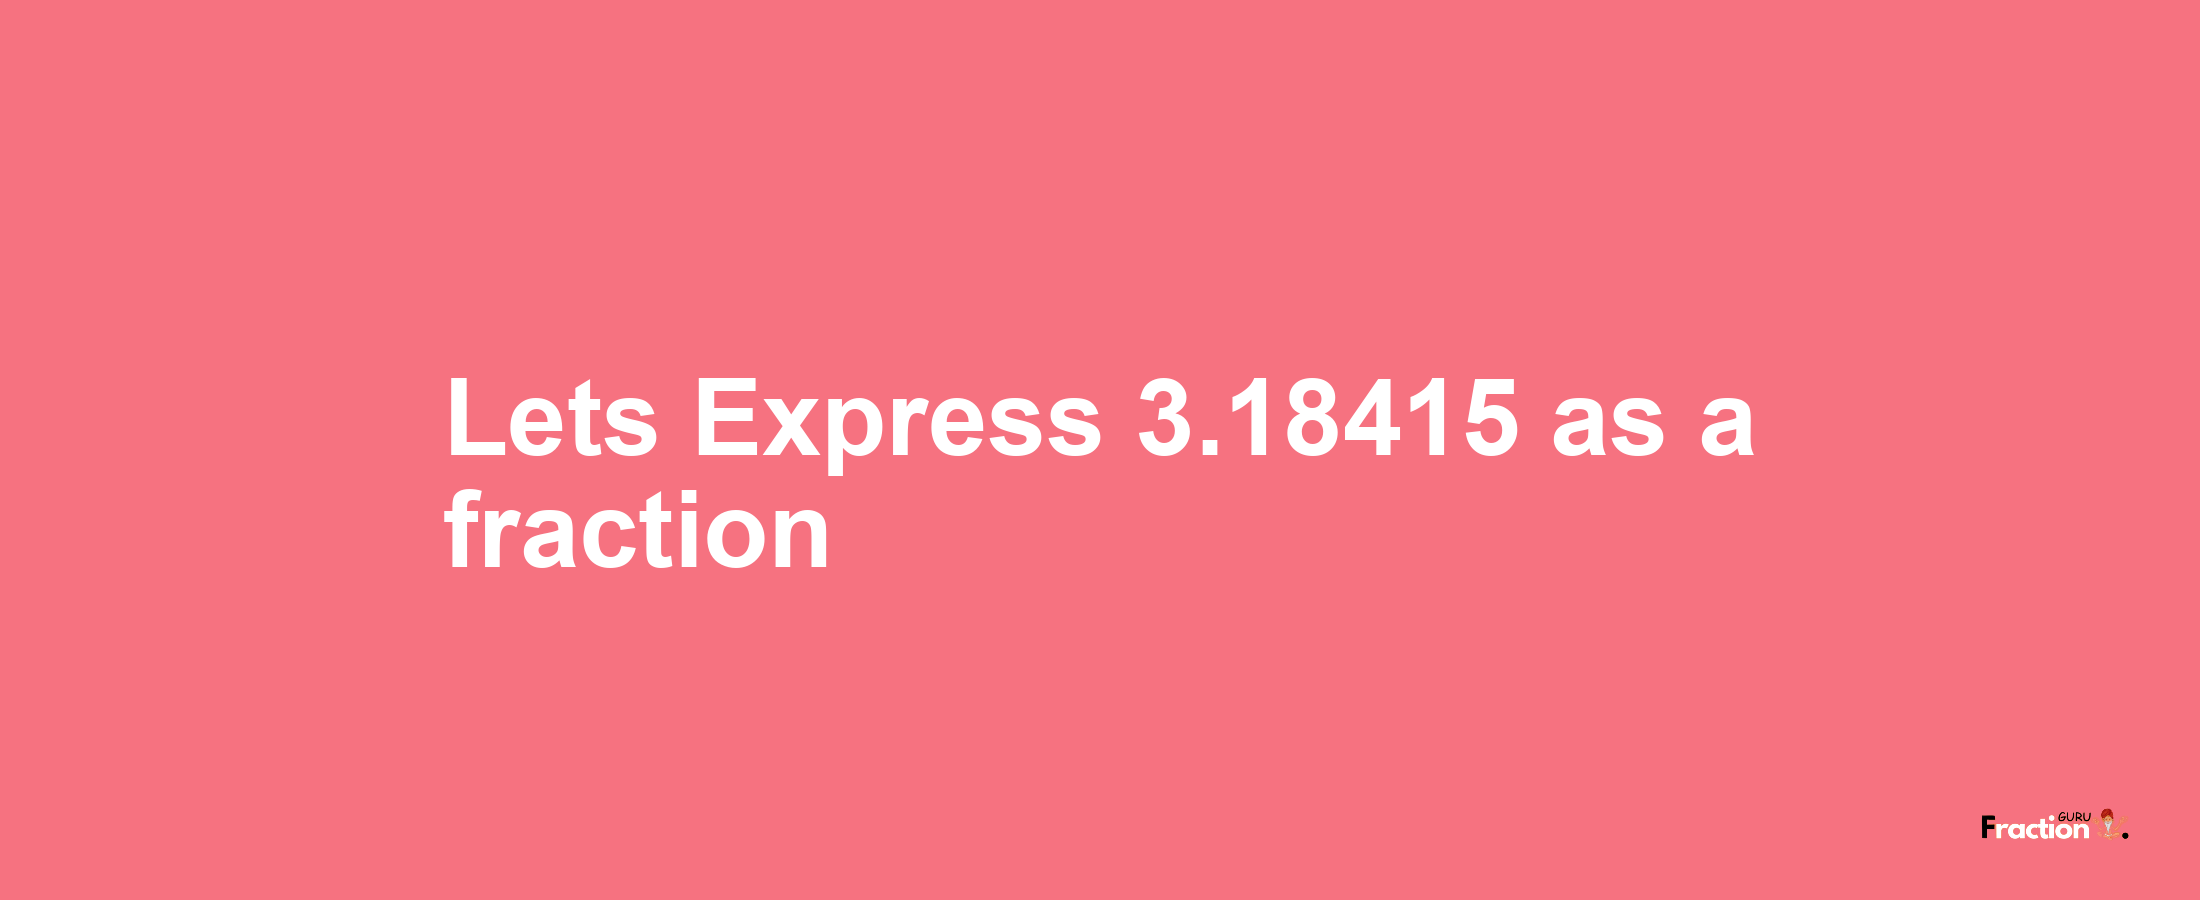 Lets Express 3.18415 as afraction